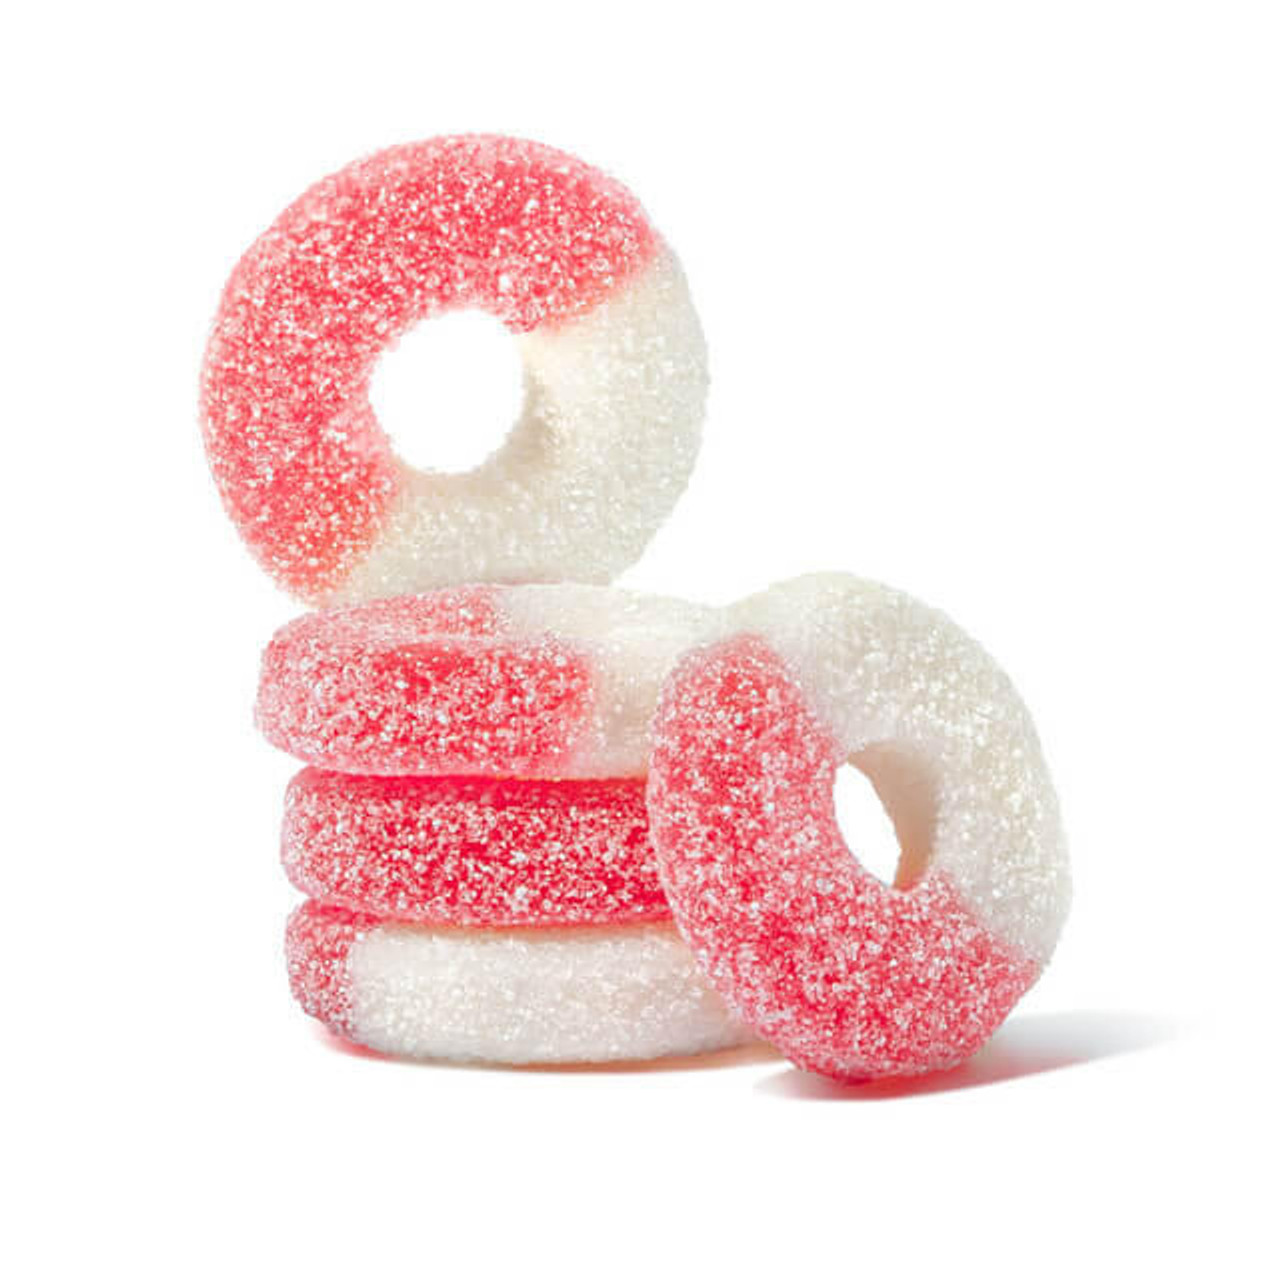  Albanese Watermelon Gummi Rings 4.5 lb. - 4/Case  Gummies in Pink and White 